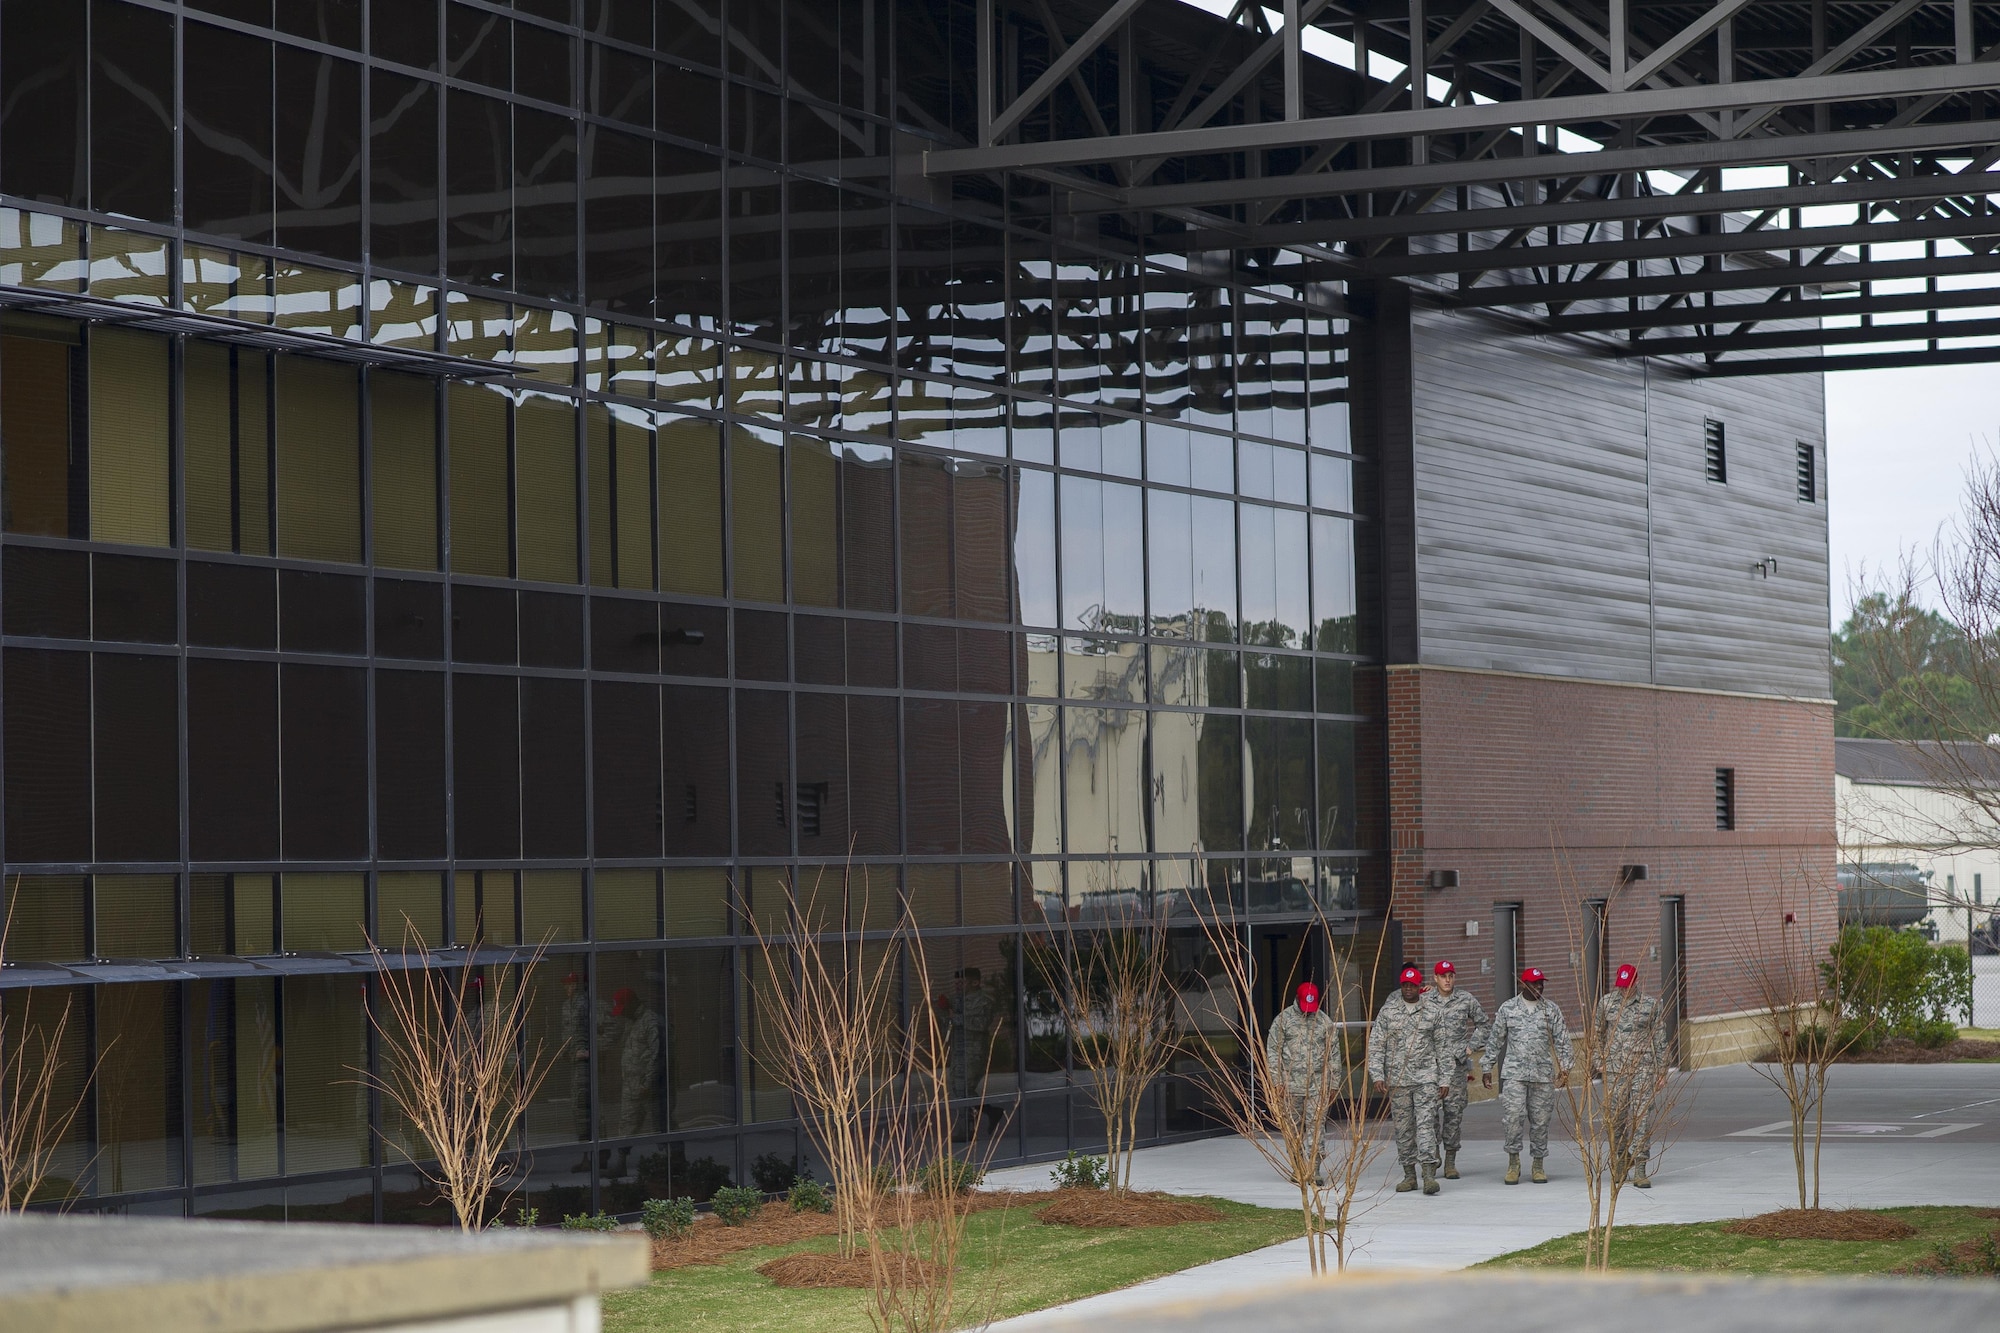 Members from the 560th RED HORSE Squadron, along with joint mission partners and special guests, attend a ribbon cutting ceremony for the opening of a new readiness and training facility Jan. 6, 2017, at Joint Base Charleston, South Carolina. The new buildings will provide dedicated areas for the unit's offices, shops and storage (U.S. Air Force photo by Senior Airman Jonathan Lane).